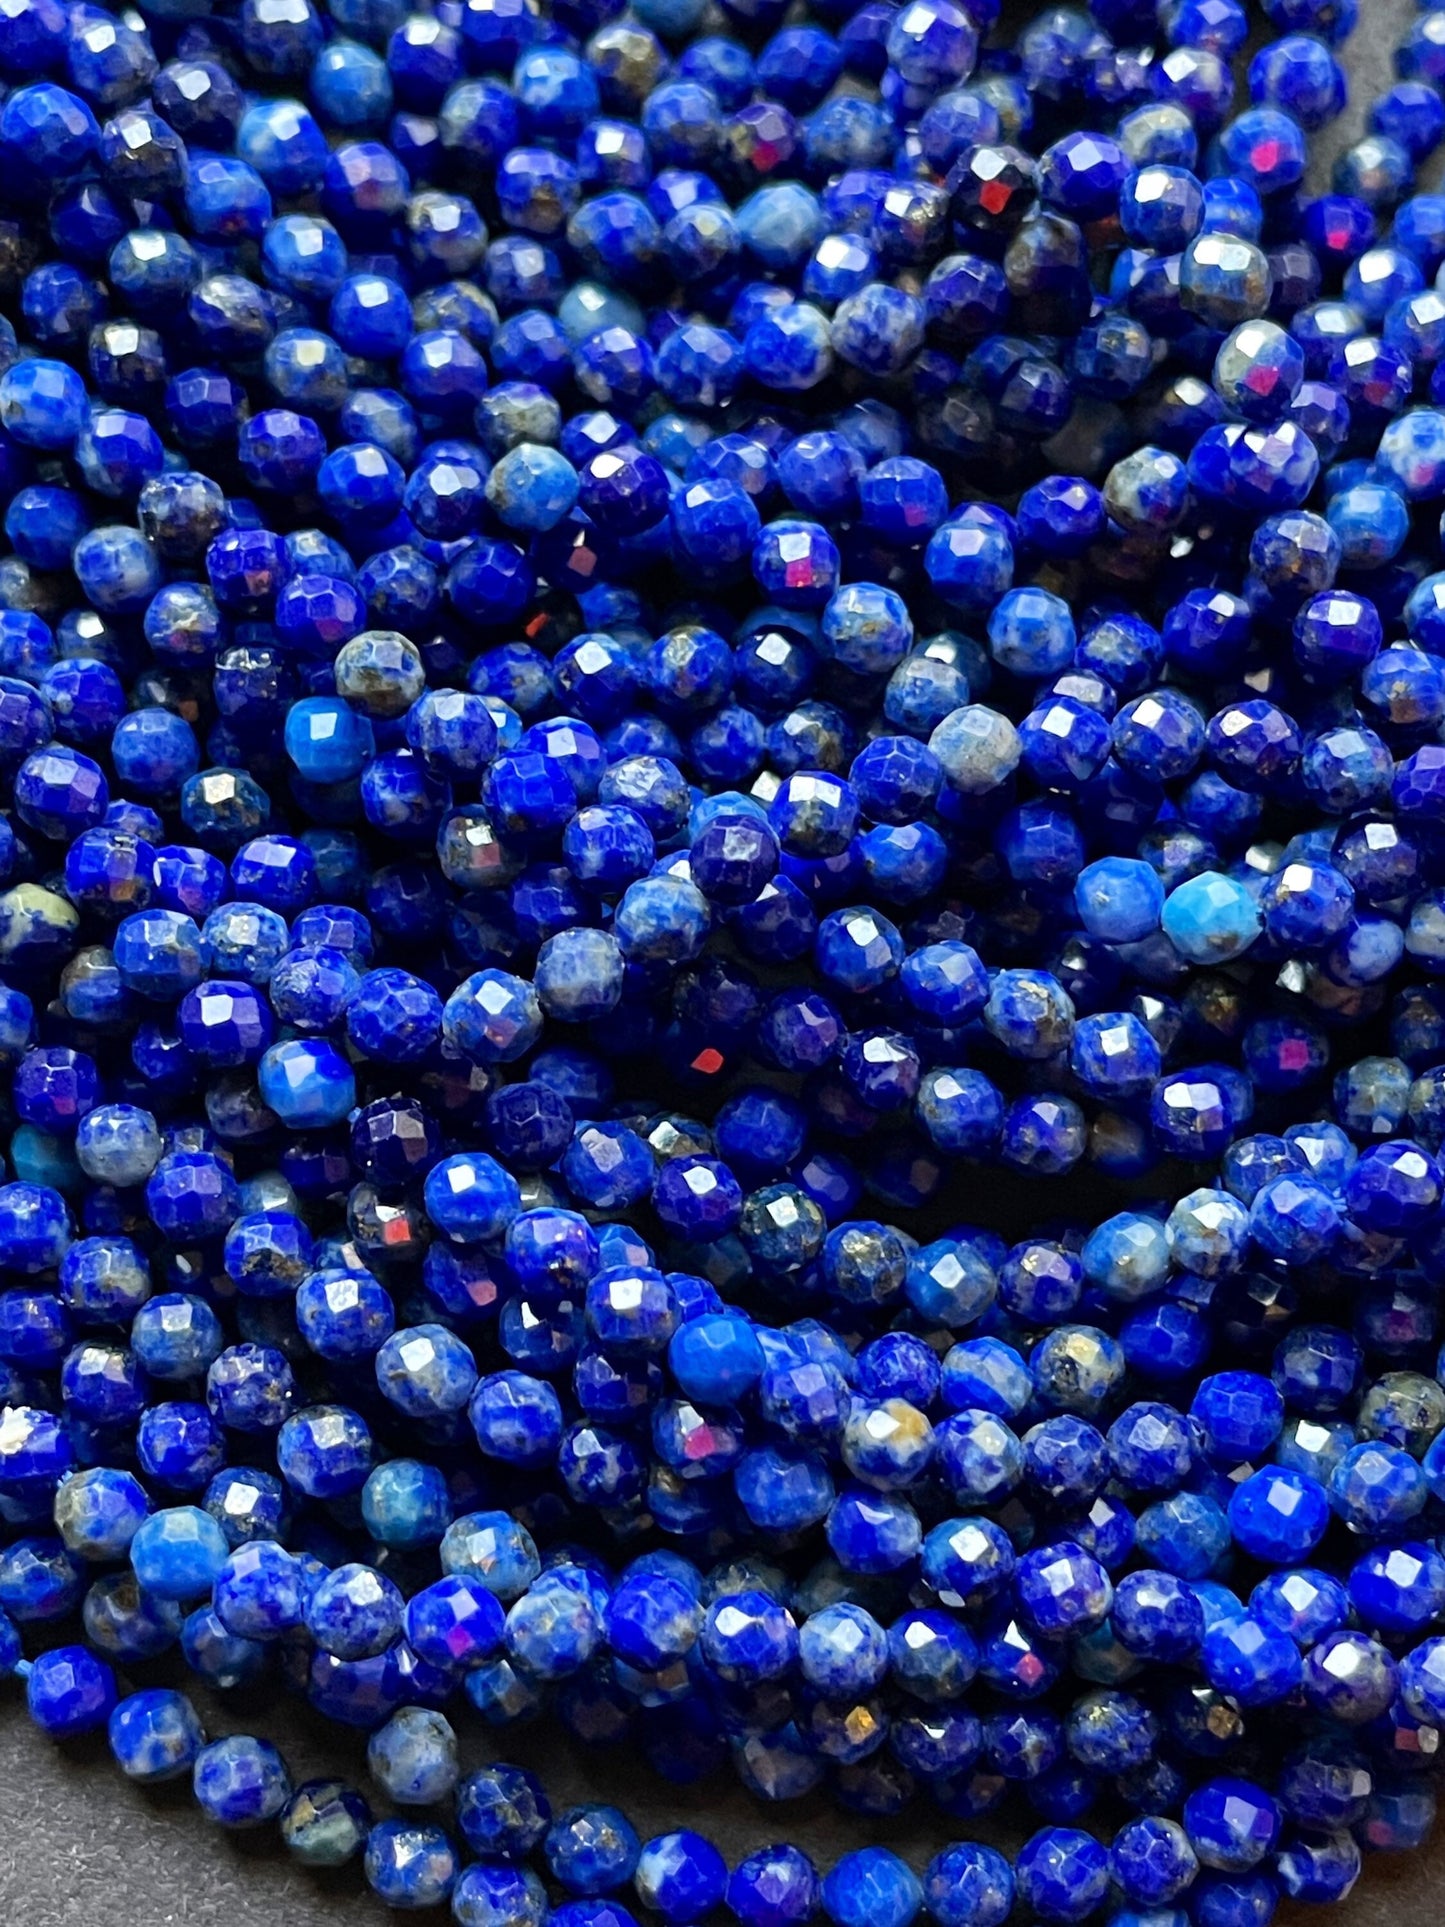 AAA Natural Lapis Lazuli Gemstone Bead Faceted 2mm Round Beads, Gorgeous Natural Royal Blue Color Lapis Lazuli Gemstone Beads